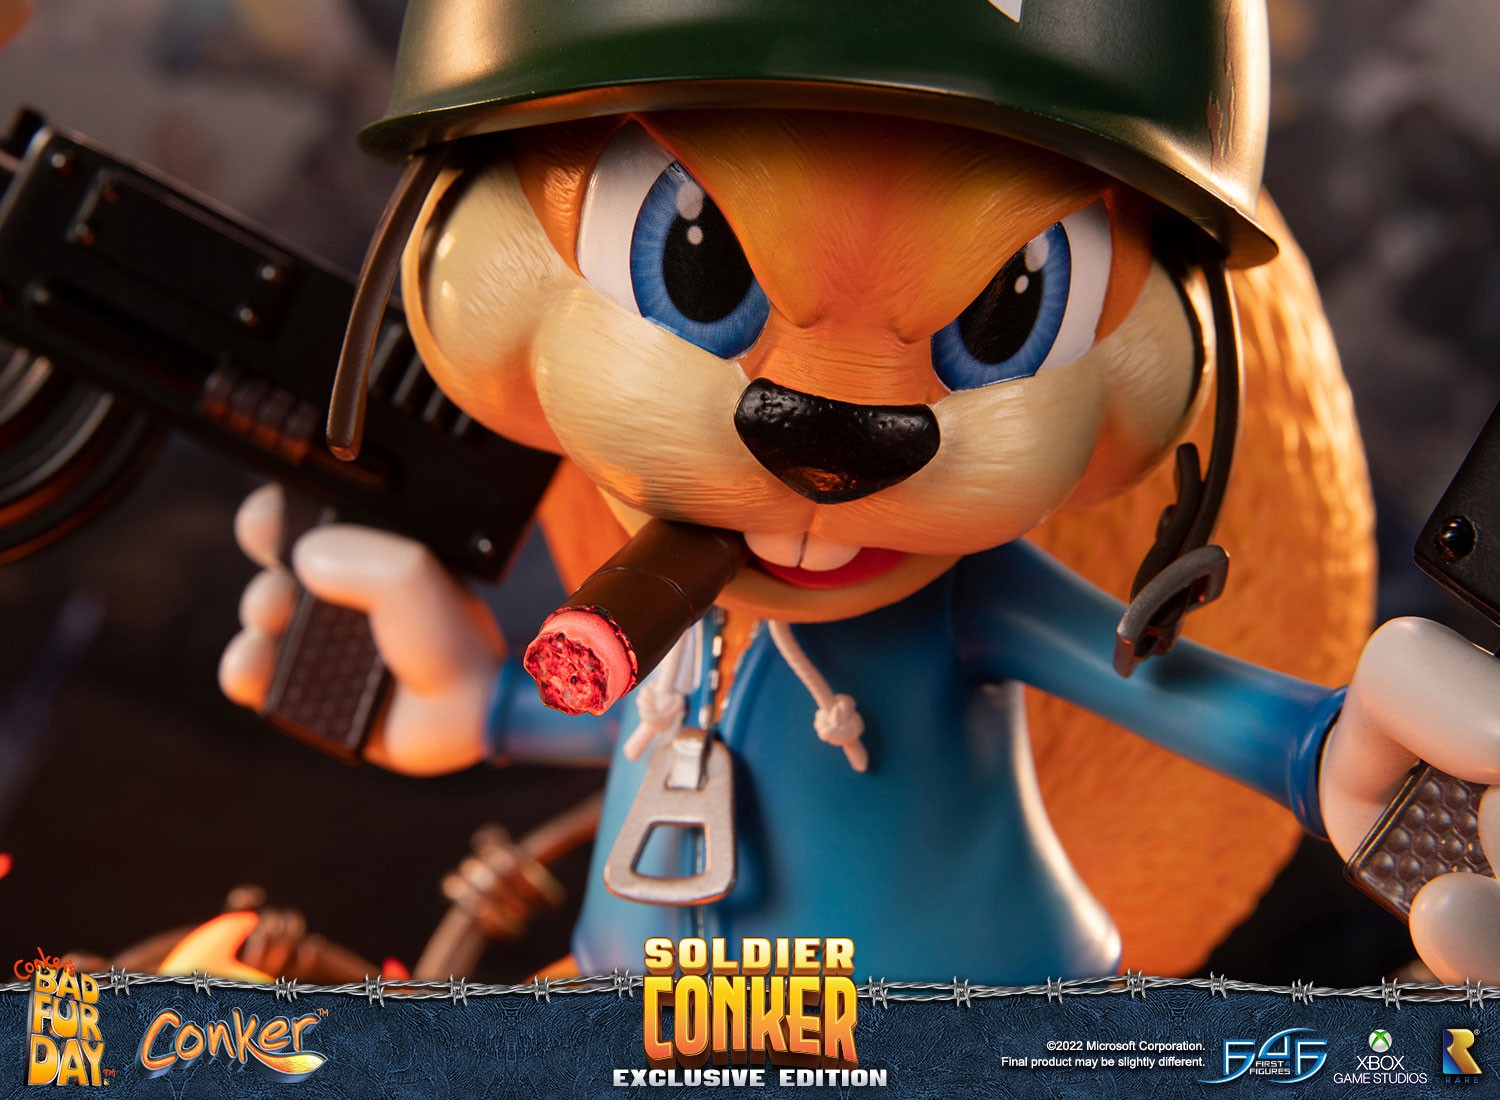 scale Try out fuzzy Conker: Conker's Bad Fur Day™ - Soldier Conker (Exclusive Edition)